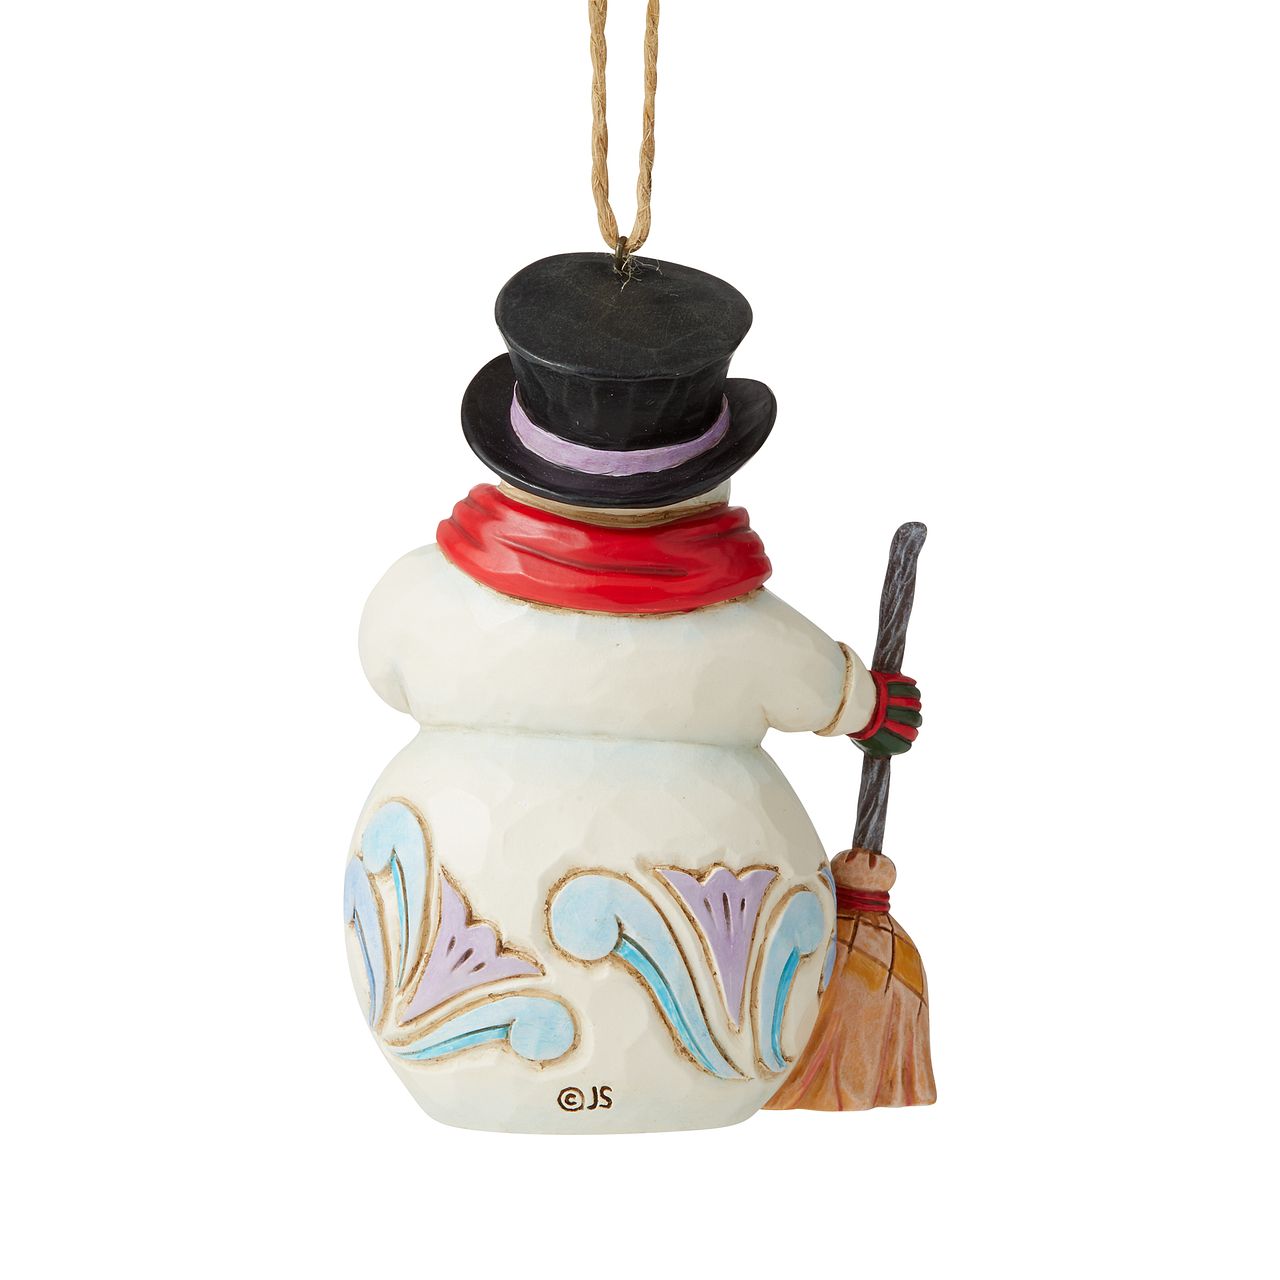 Jim Shore Heartwood Creek Snowman Scarf and Broom Hanging Ornament  Designed by award-winning artist and sculptor Jim Shore for Heartwood Creek. Ornament hangs by jute rope and features a handcrafted look.